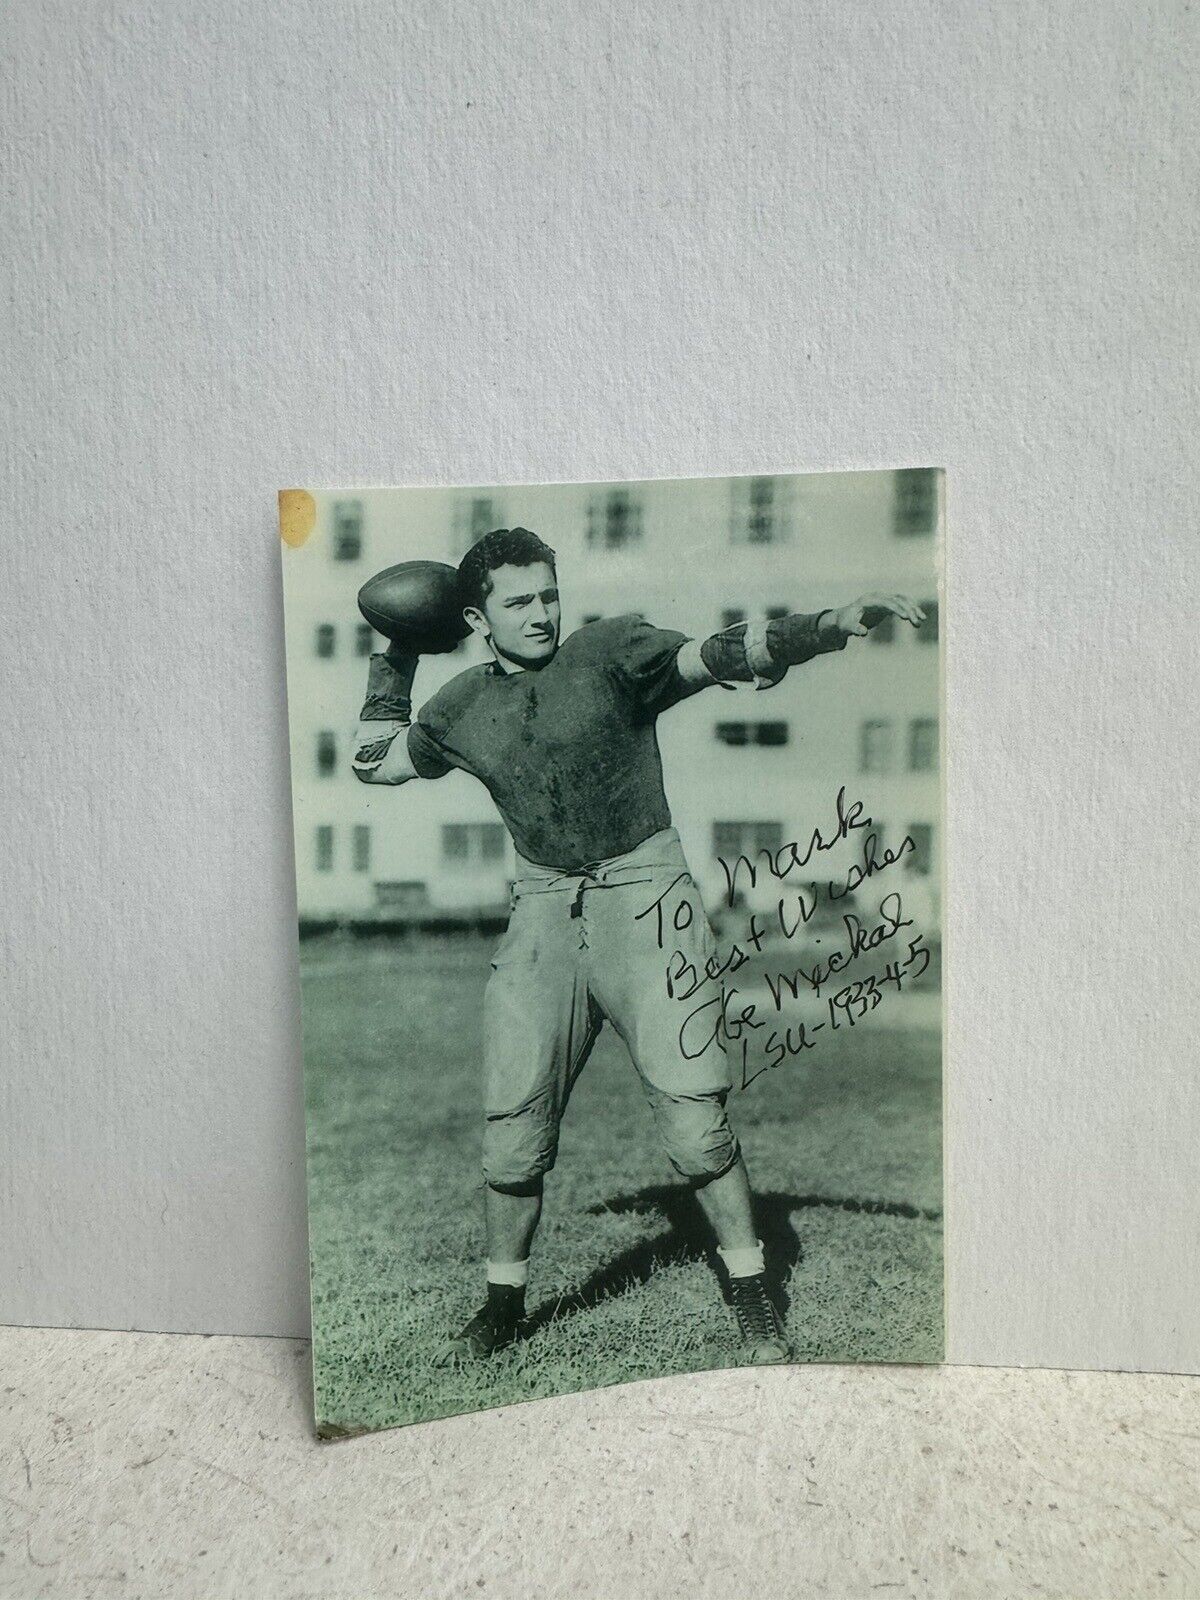 Abe Mickal LSU Tigers College Football HOF Signed Autograph Photo Display